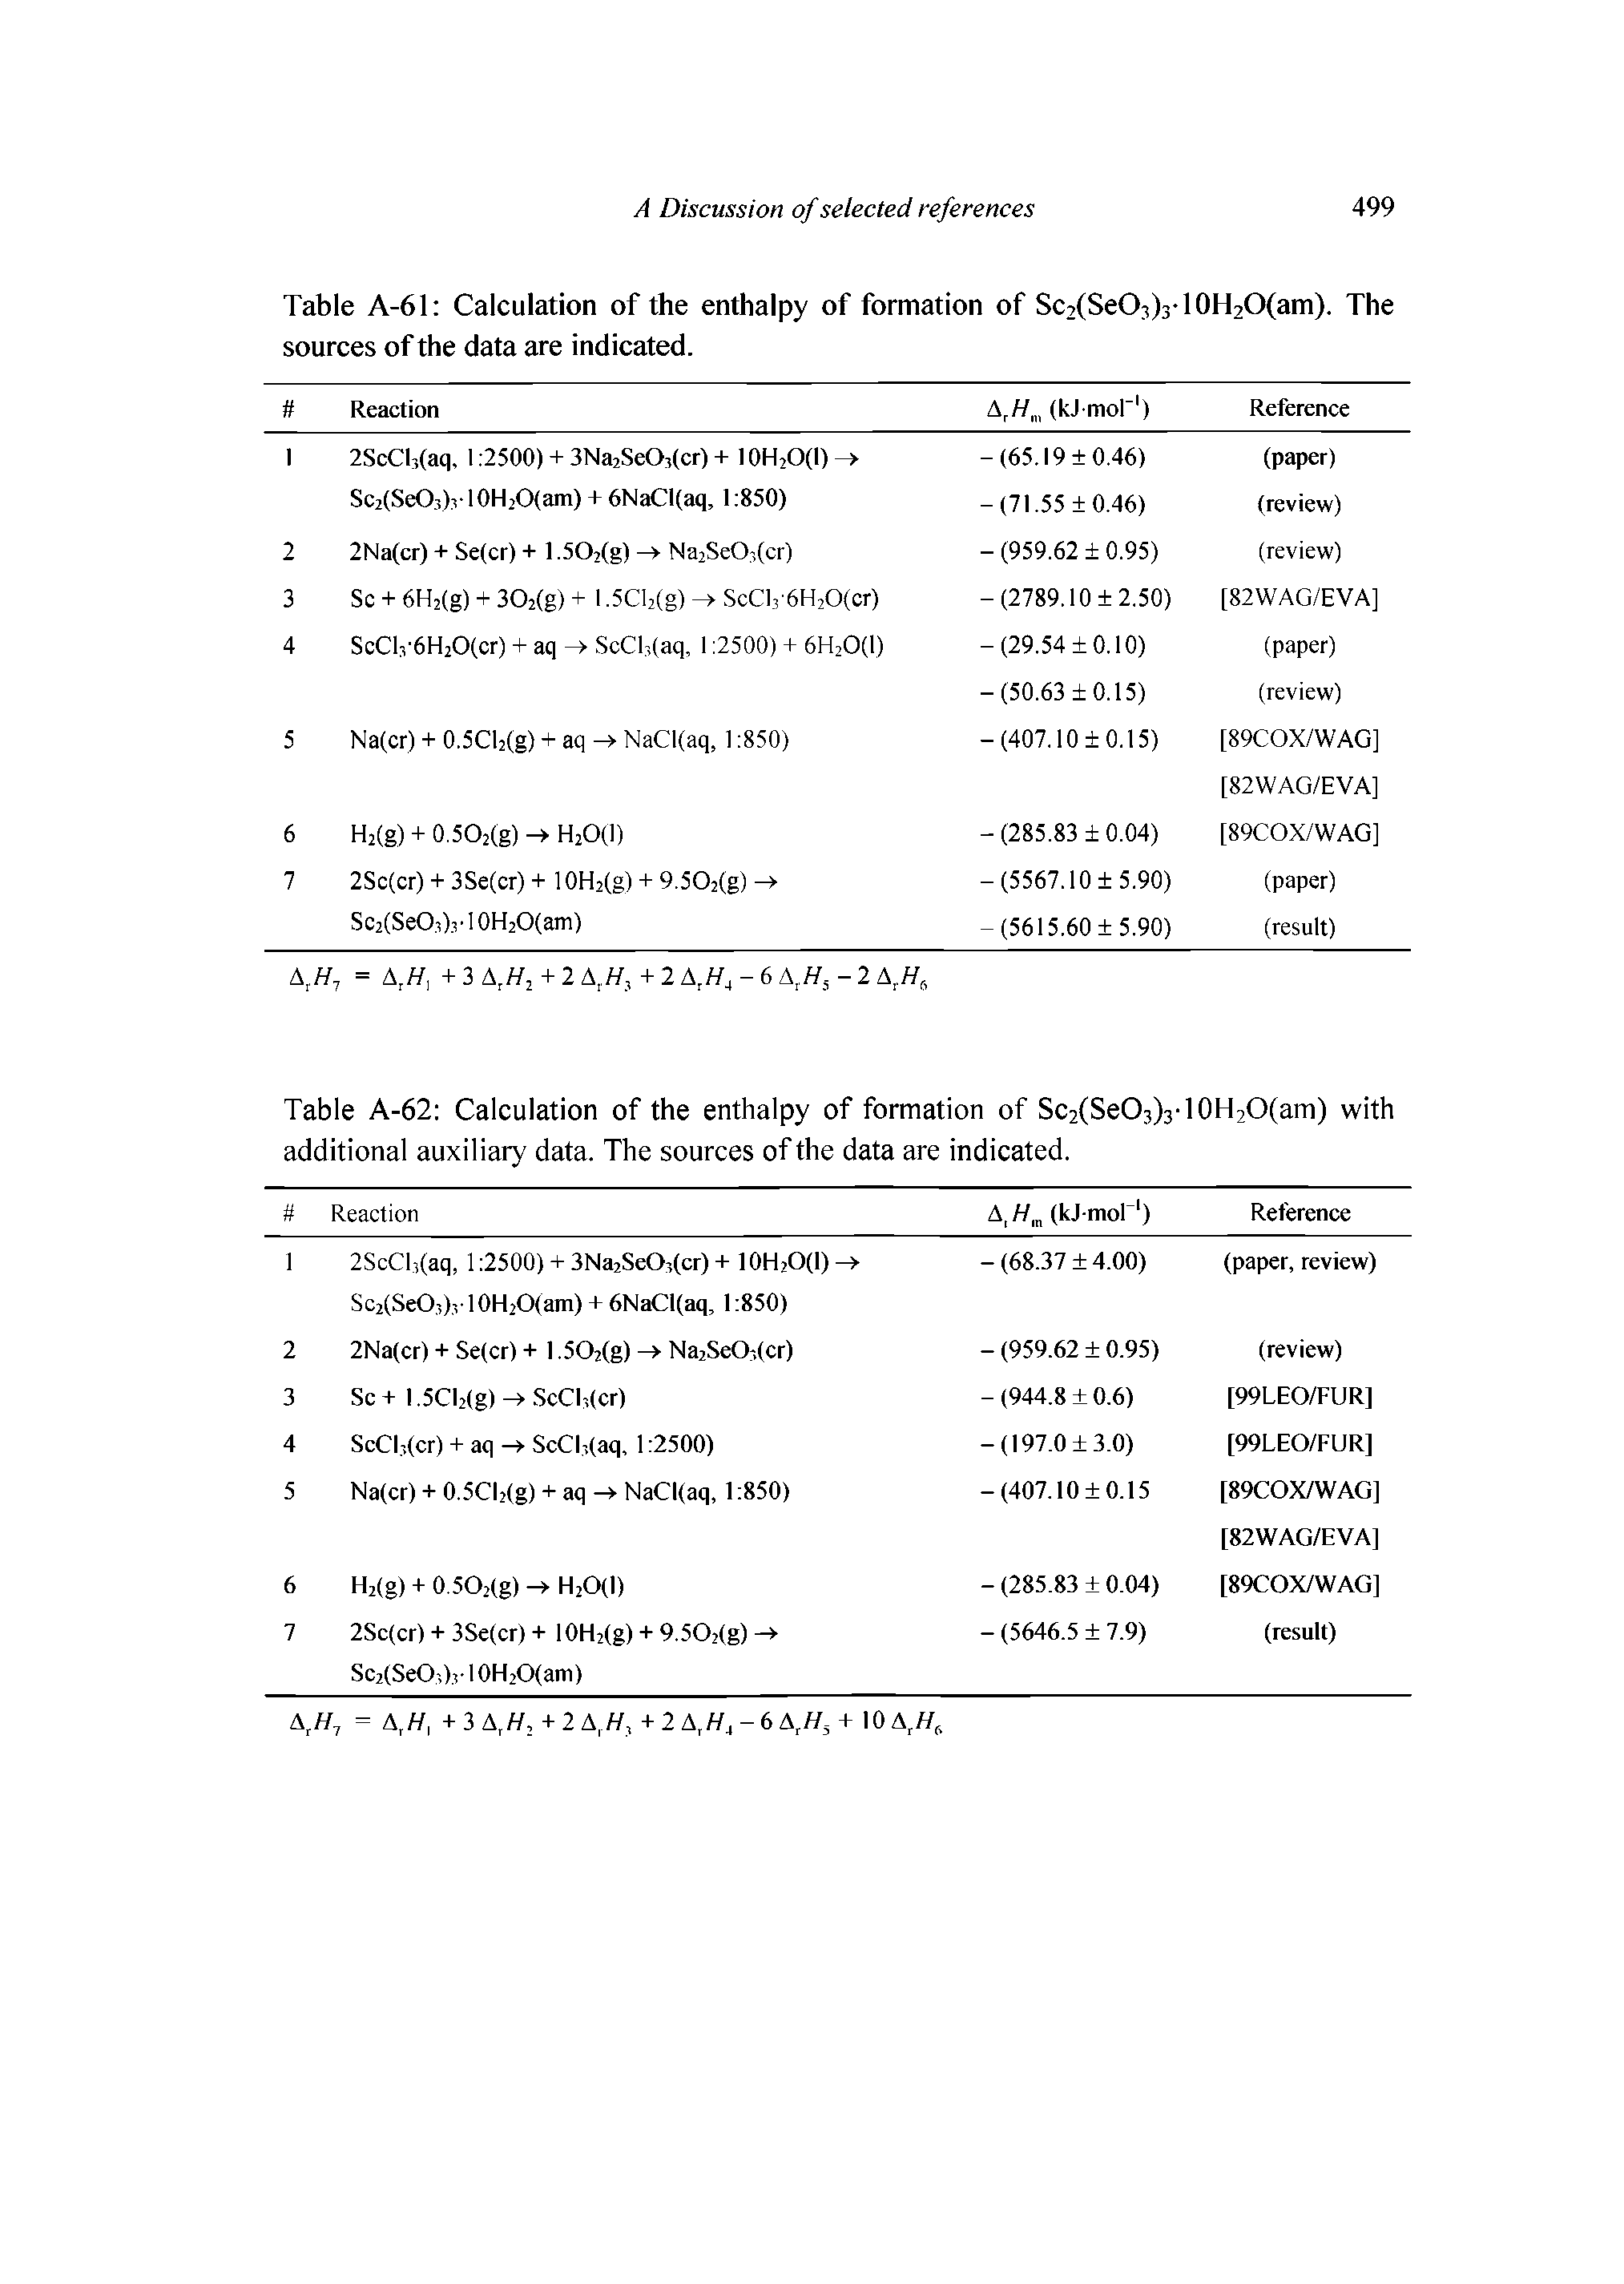 Table A-62 Calculation of the enthalpy of formation of Sc2(SeO3)3-10H2O(am) with additional auxiliary data. The sources of the data are indicated.